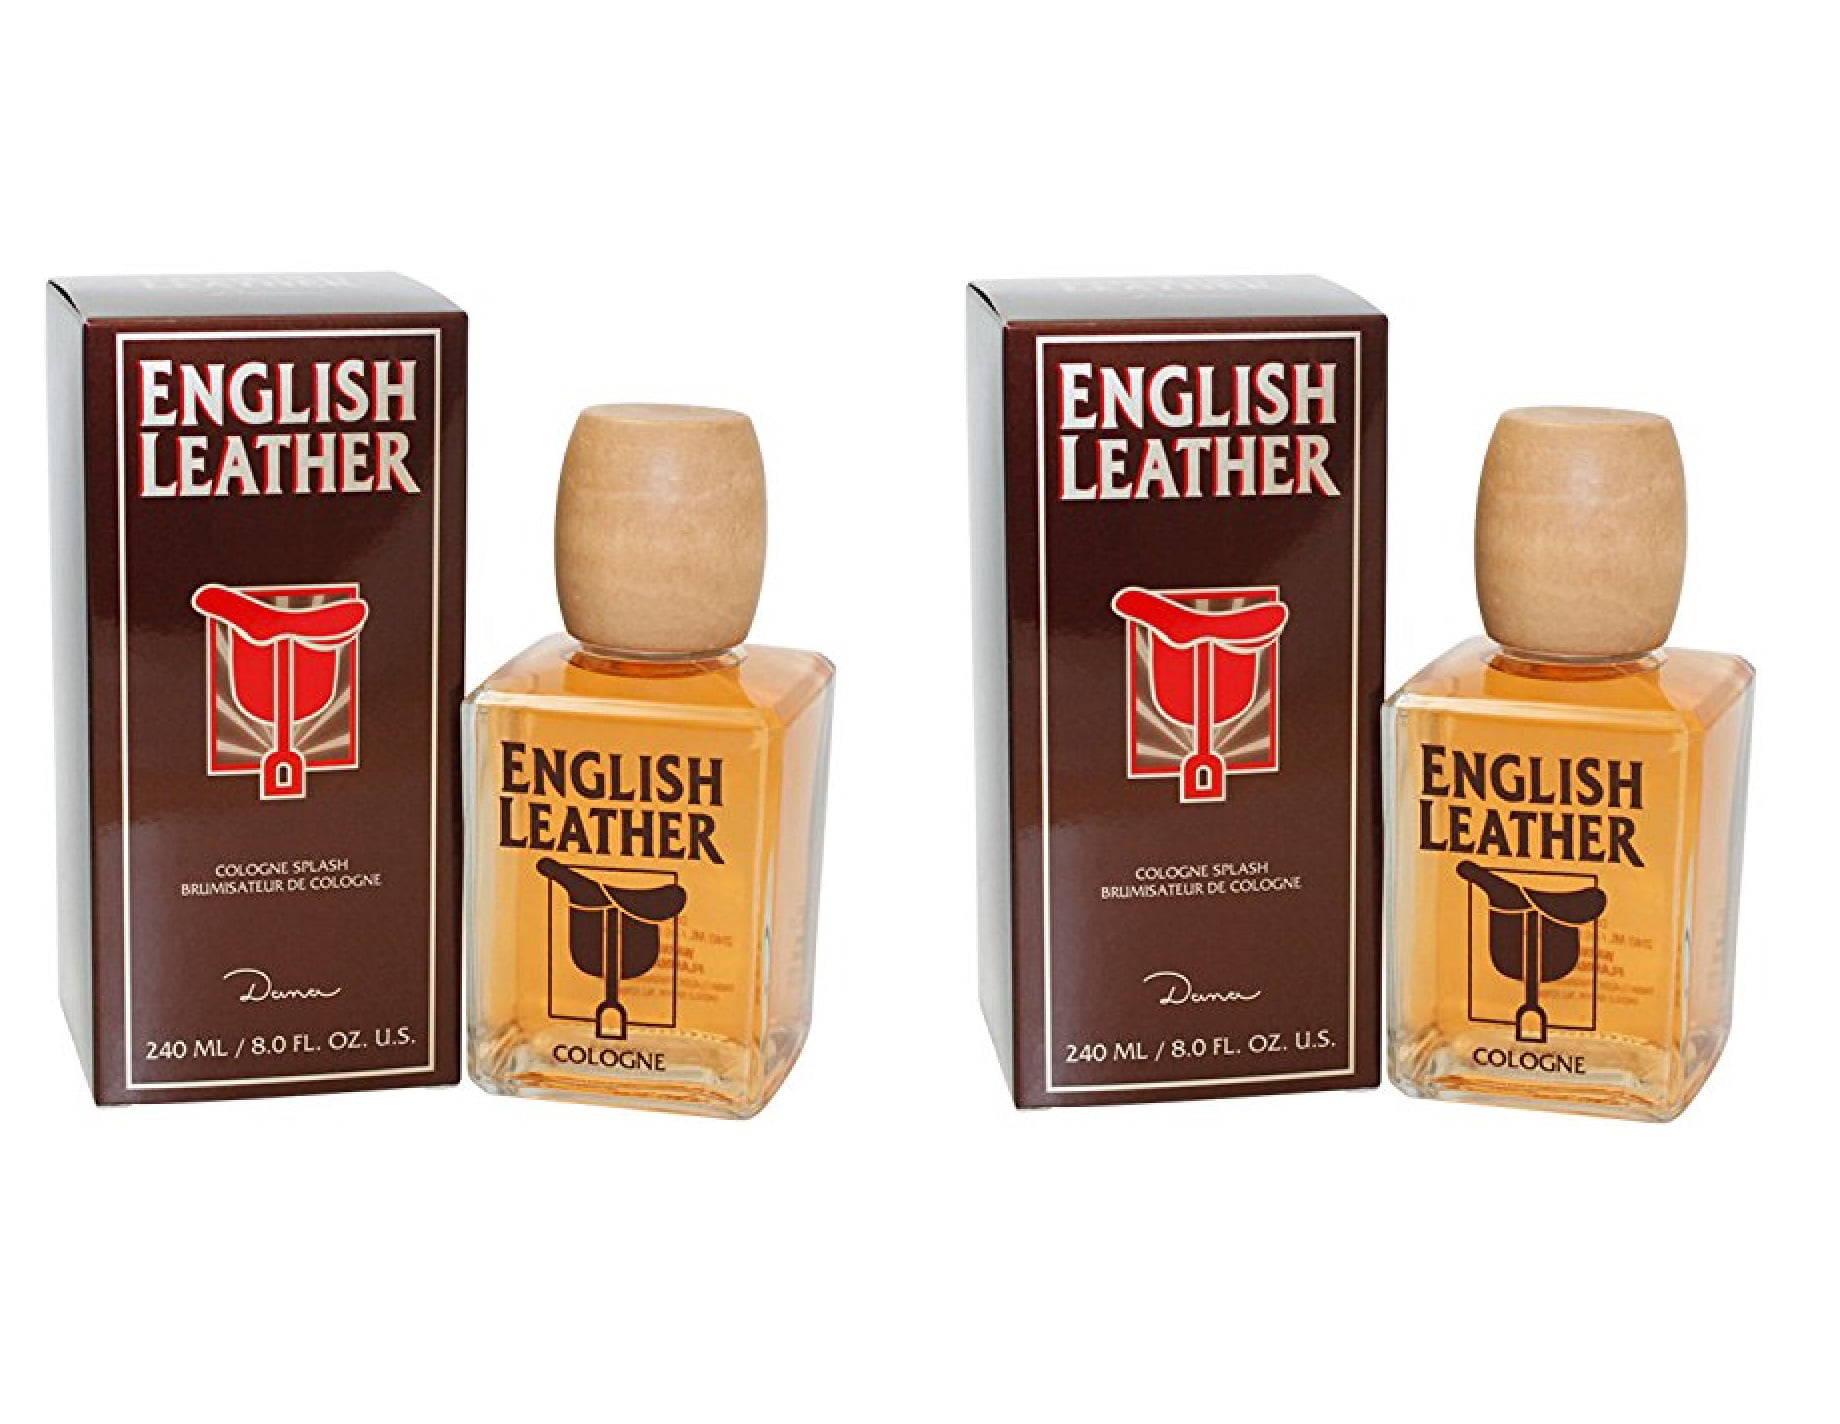 English Leather By Dana .5 oz / 15 ml Cologne Lot of 2 w box original  Packaging.